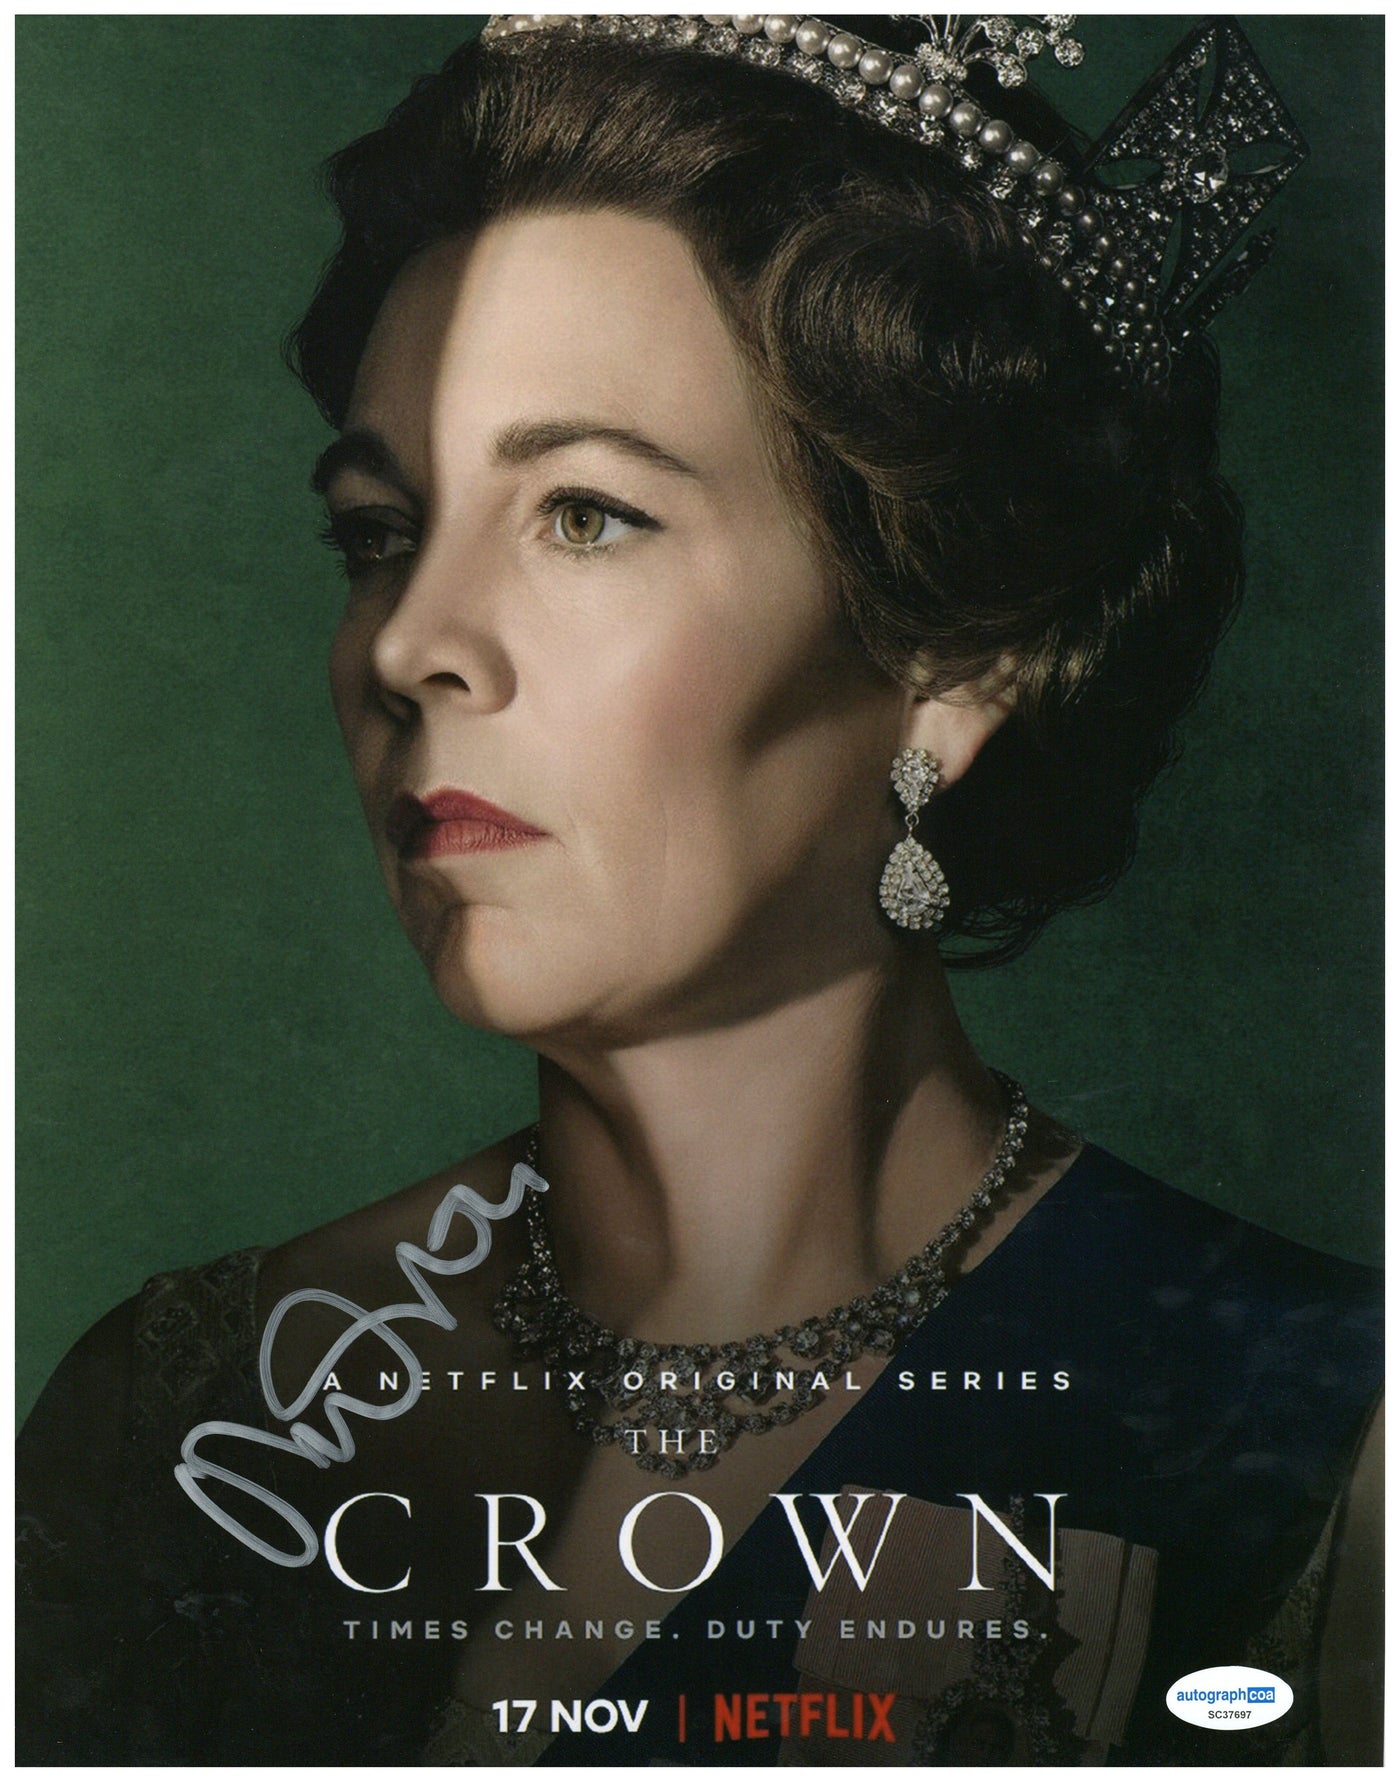 Olivia Colman Signed 11x14 Photo The Crown Authentic Autographed ACOA